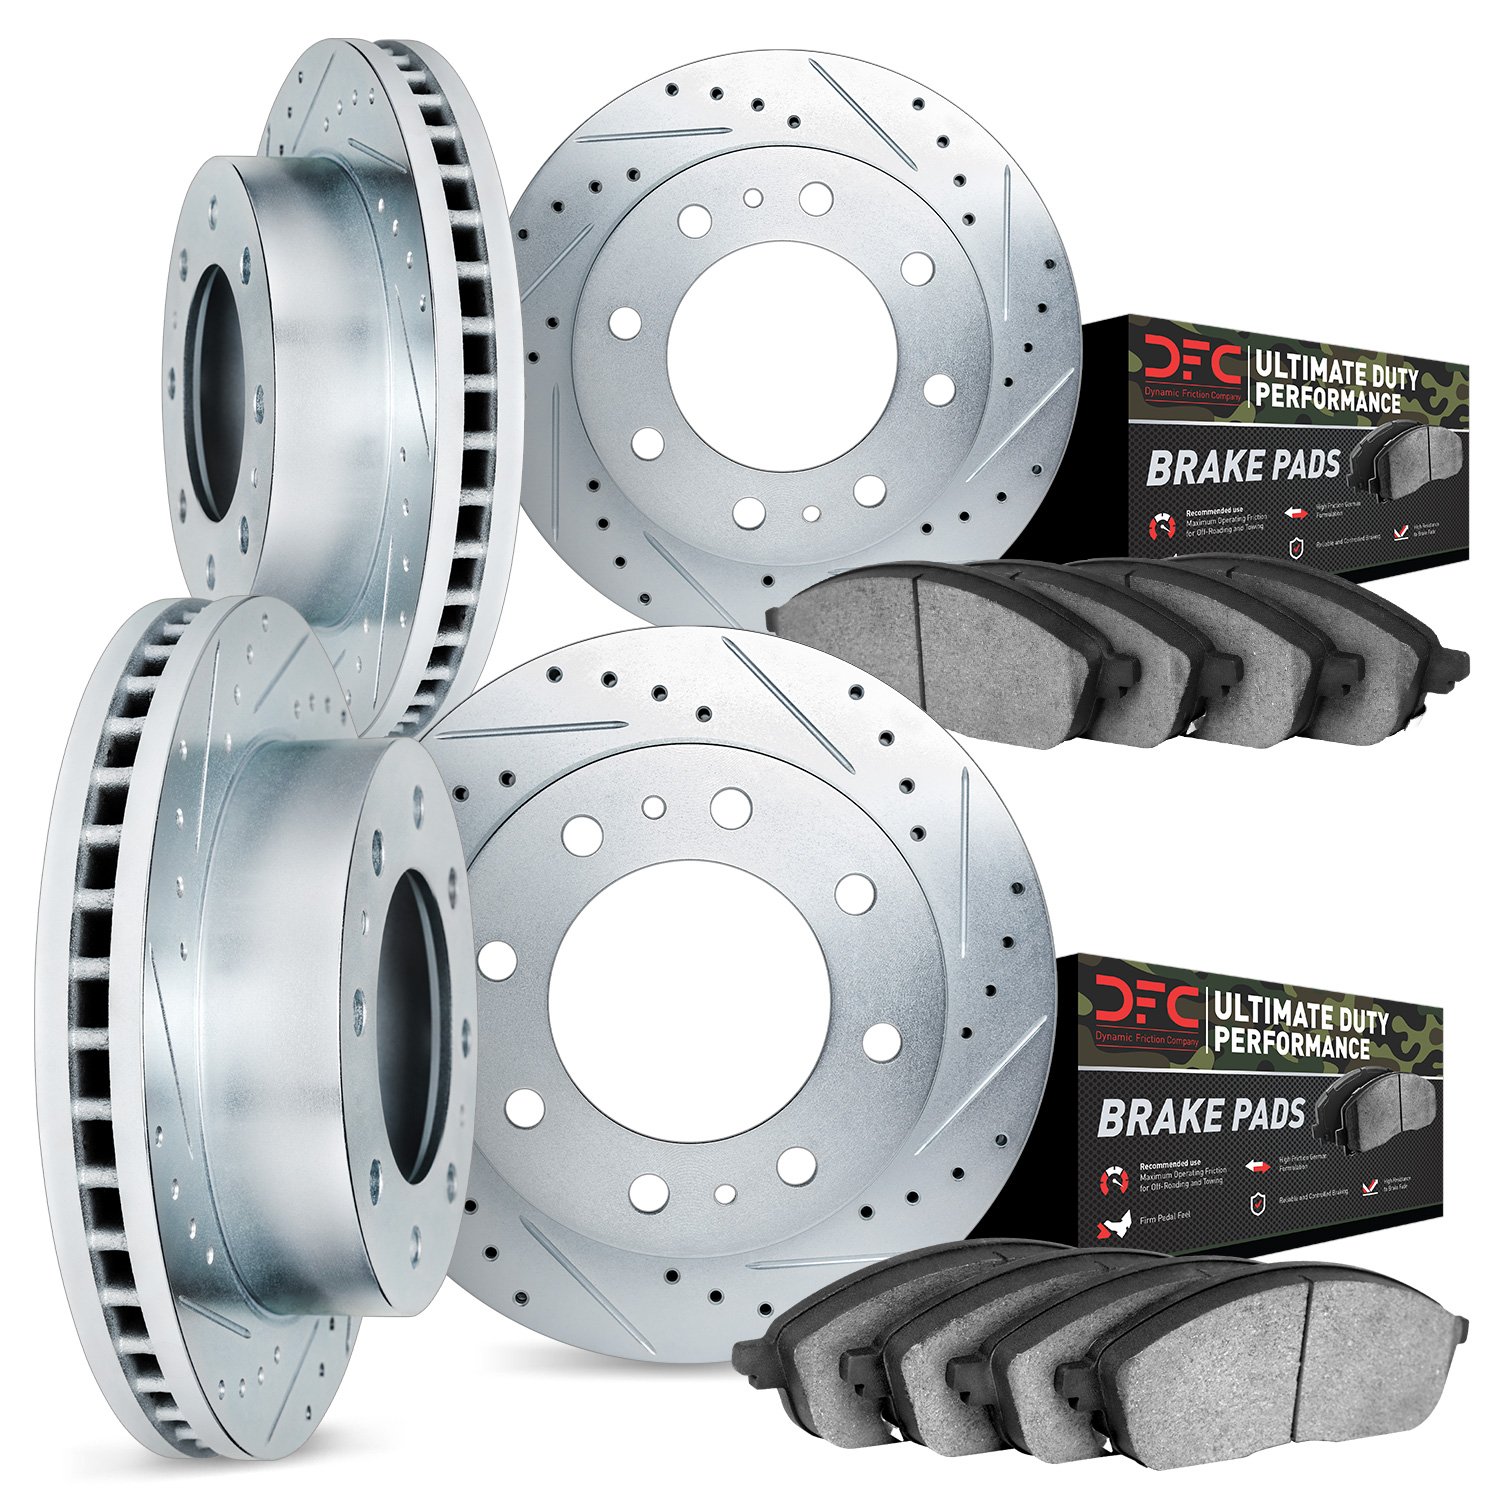 7404-54018 Drilled/Slotted Brake Rotors with Ultimate-Duty Brake Pads Kit [Silver], 1999-2004 Ford/Lincoln/Mercury/Mazda, Positi